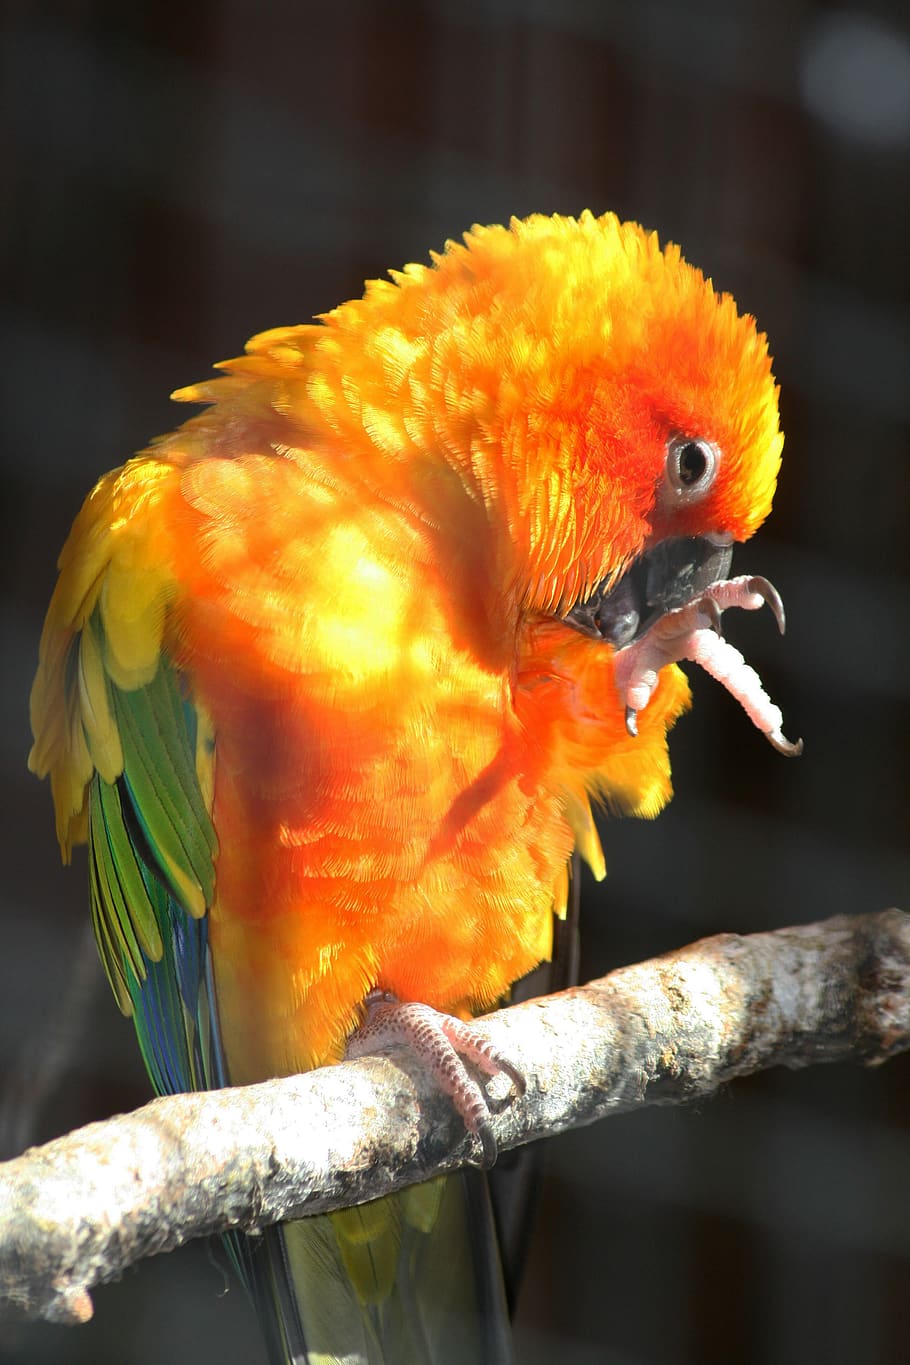 parrot, bird, close up, wildlife, nature, zoo, colorful, feathers, perched, animal